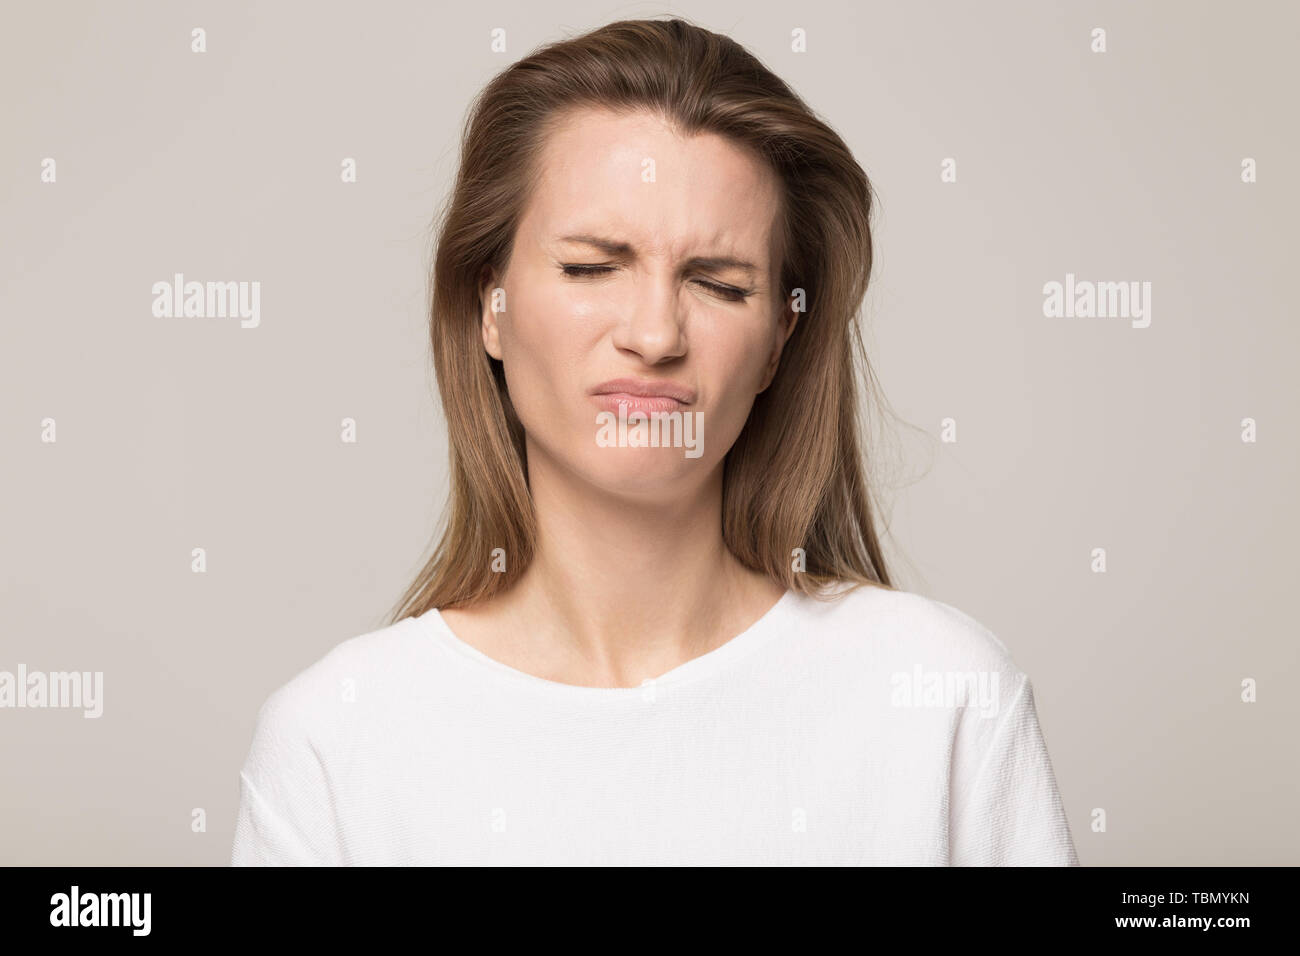 Dissatisfied young woman look at camera showing discontent Stock Photo